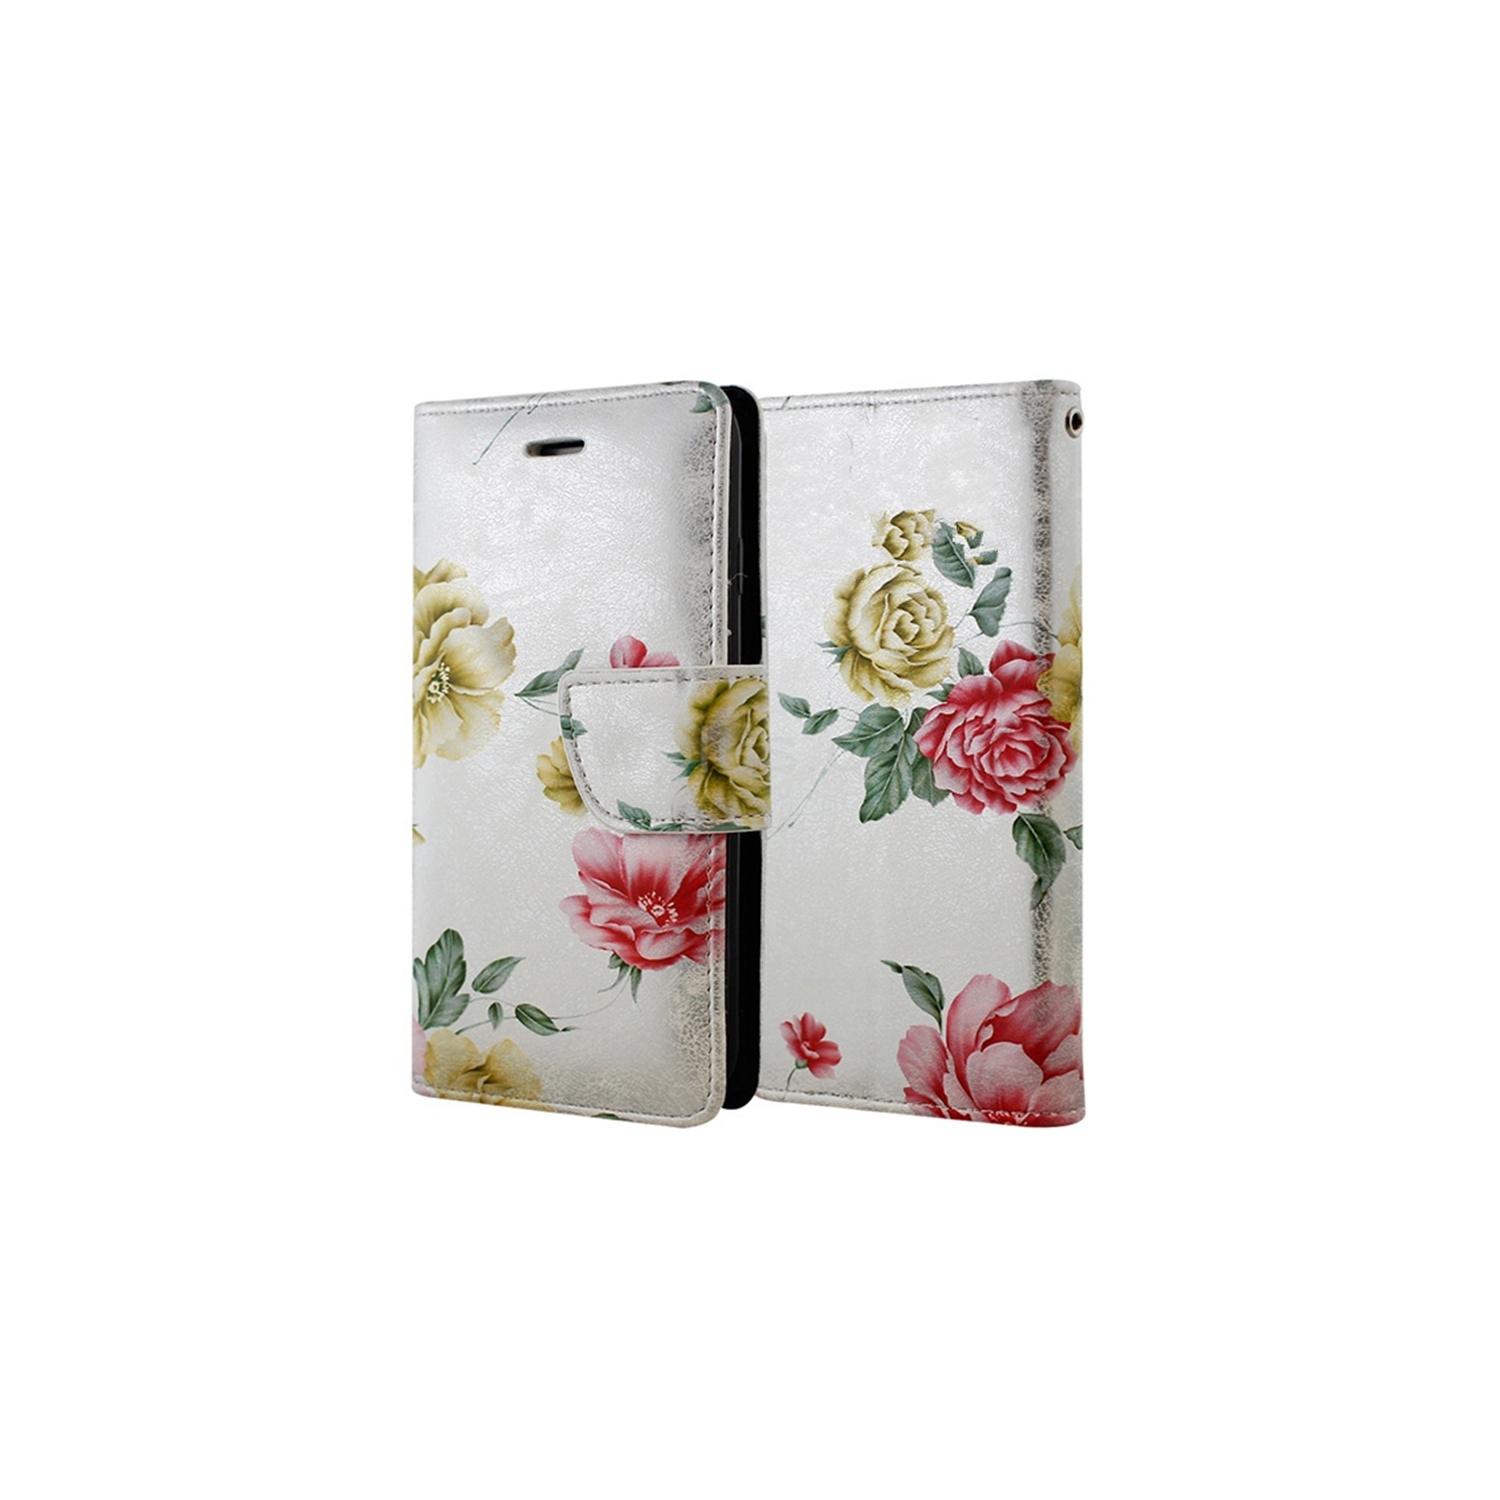 【CSmart】 Magnetic Card Slot Leather Folio Wallet Flip Case Cover for Samsung Galaxy A12 / M12 / F12, Silver Flower